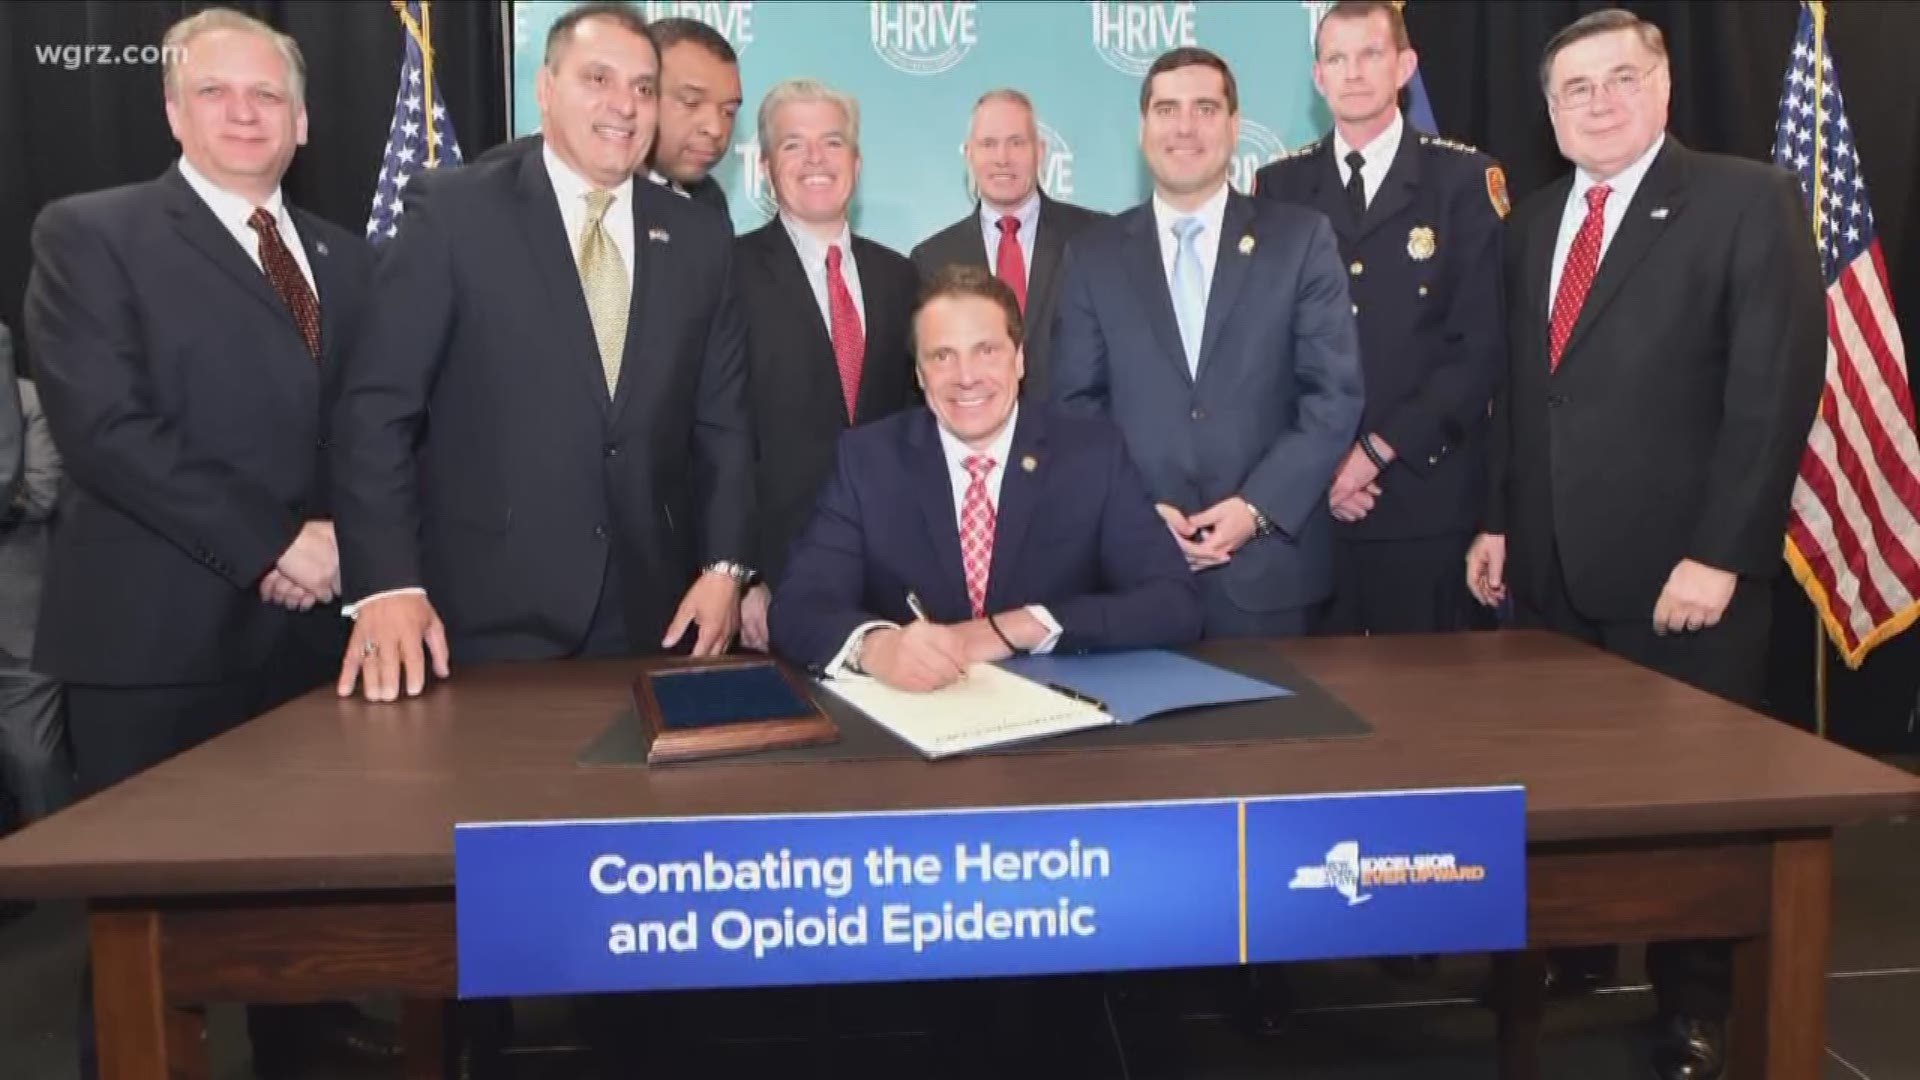 New York state has largely shifted funds from other addiction programs to fight the heroin epidemic